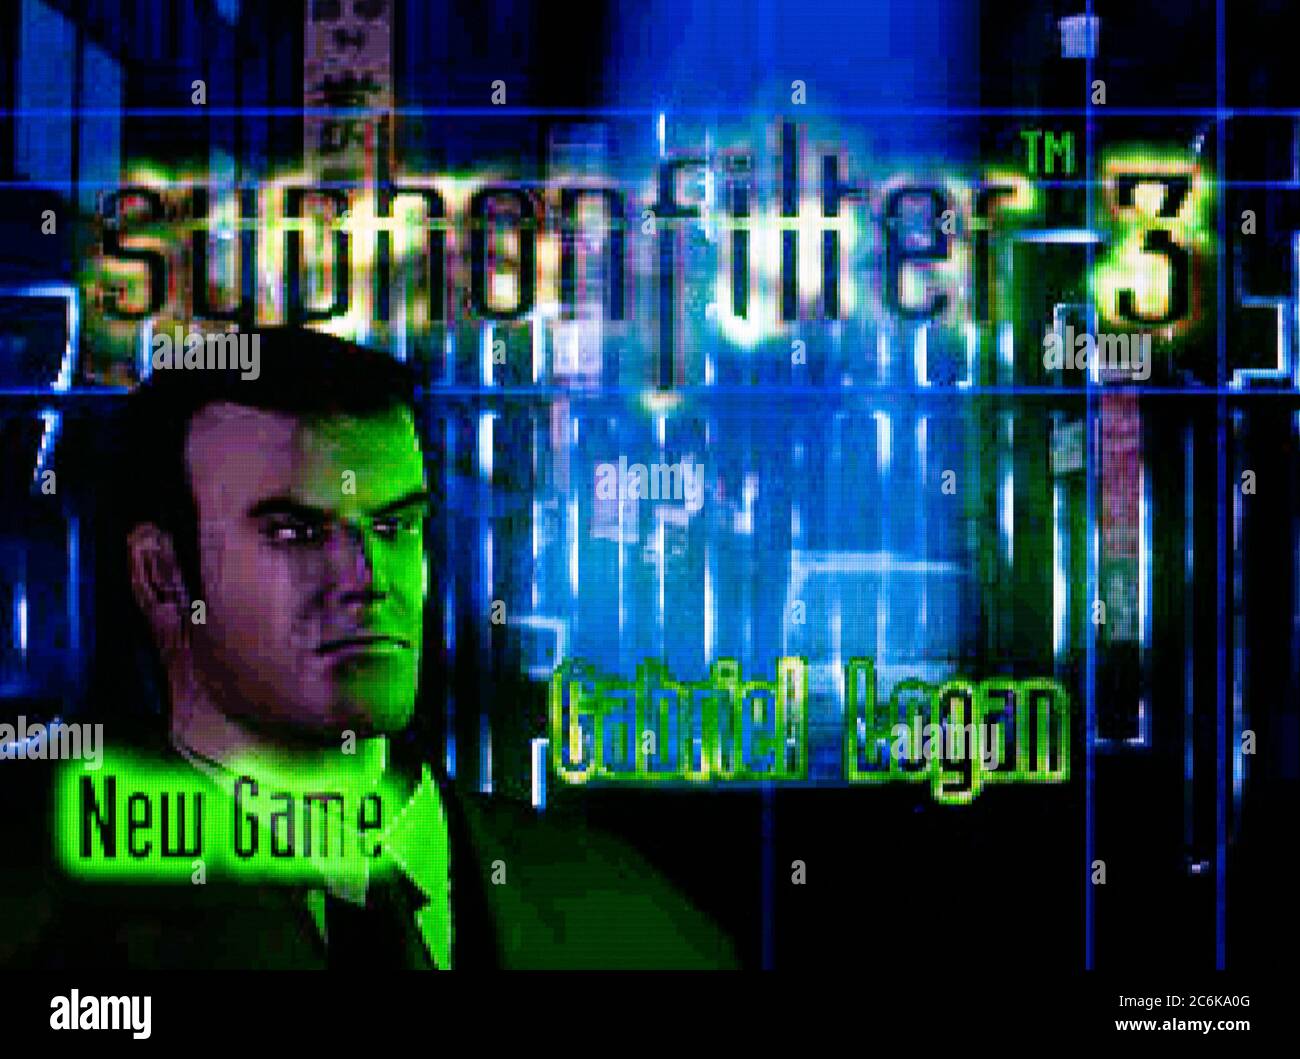 Syphon Filter 3 - Gameplay PSX / PS1 / PS One / HD 720P (Epsxe) 